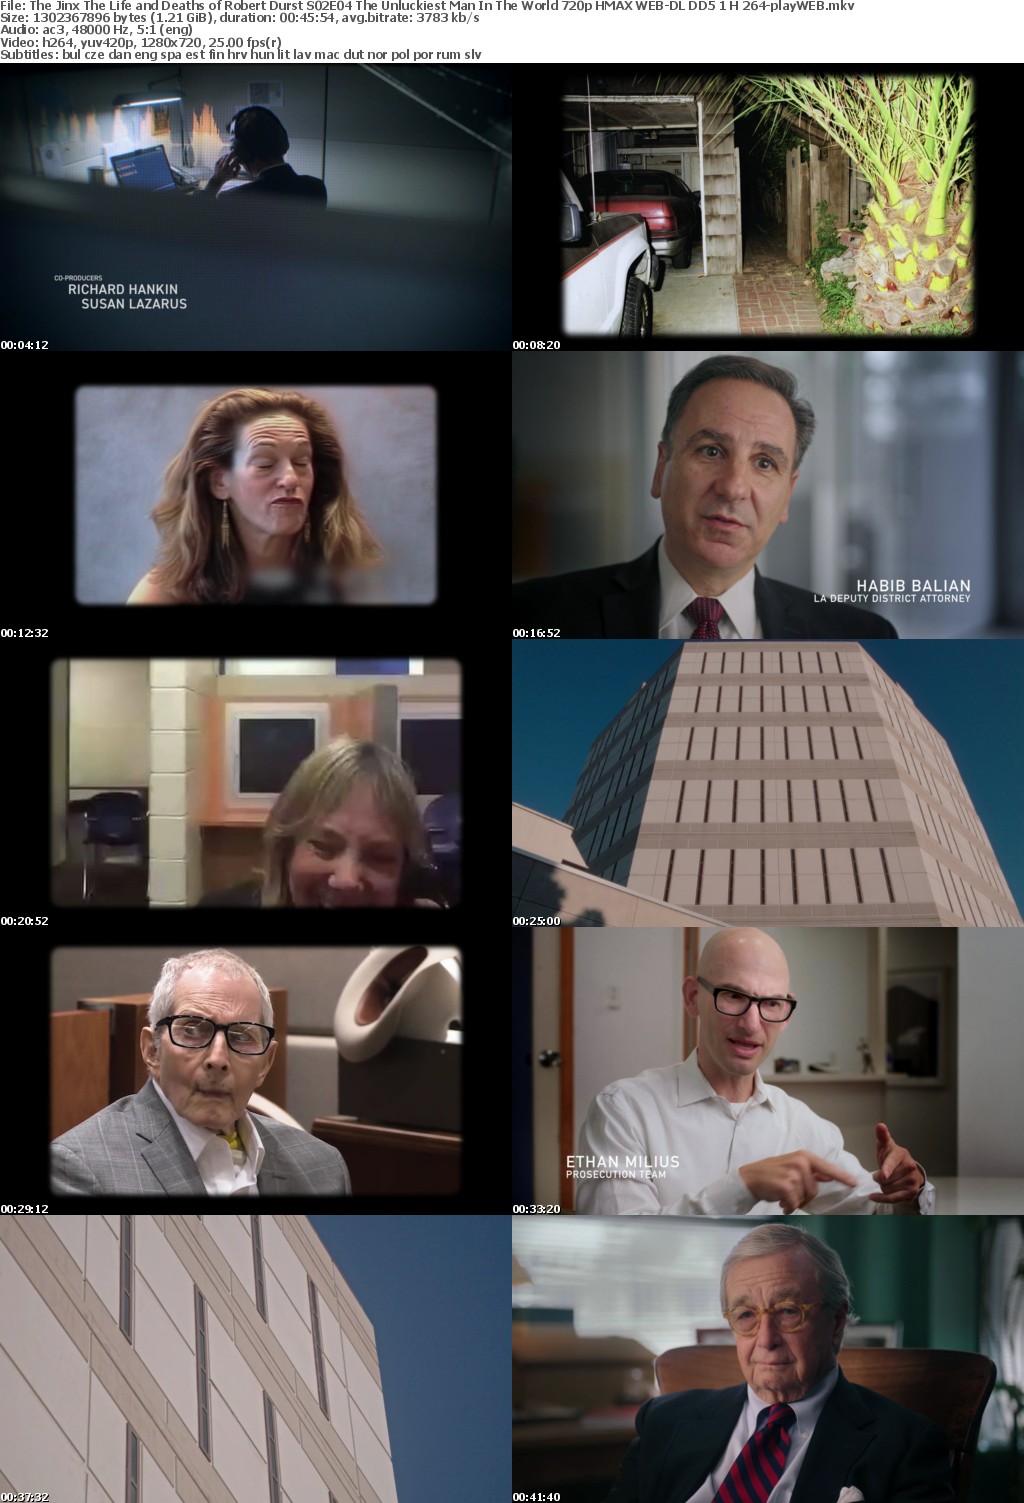 The Jinx The Life and Deaths of Robert Durst S02E04 The Unluckiest Man In The World 720p HMAX WEB-DL DD5 1 H 264-playWEB